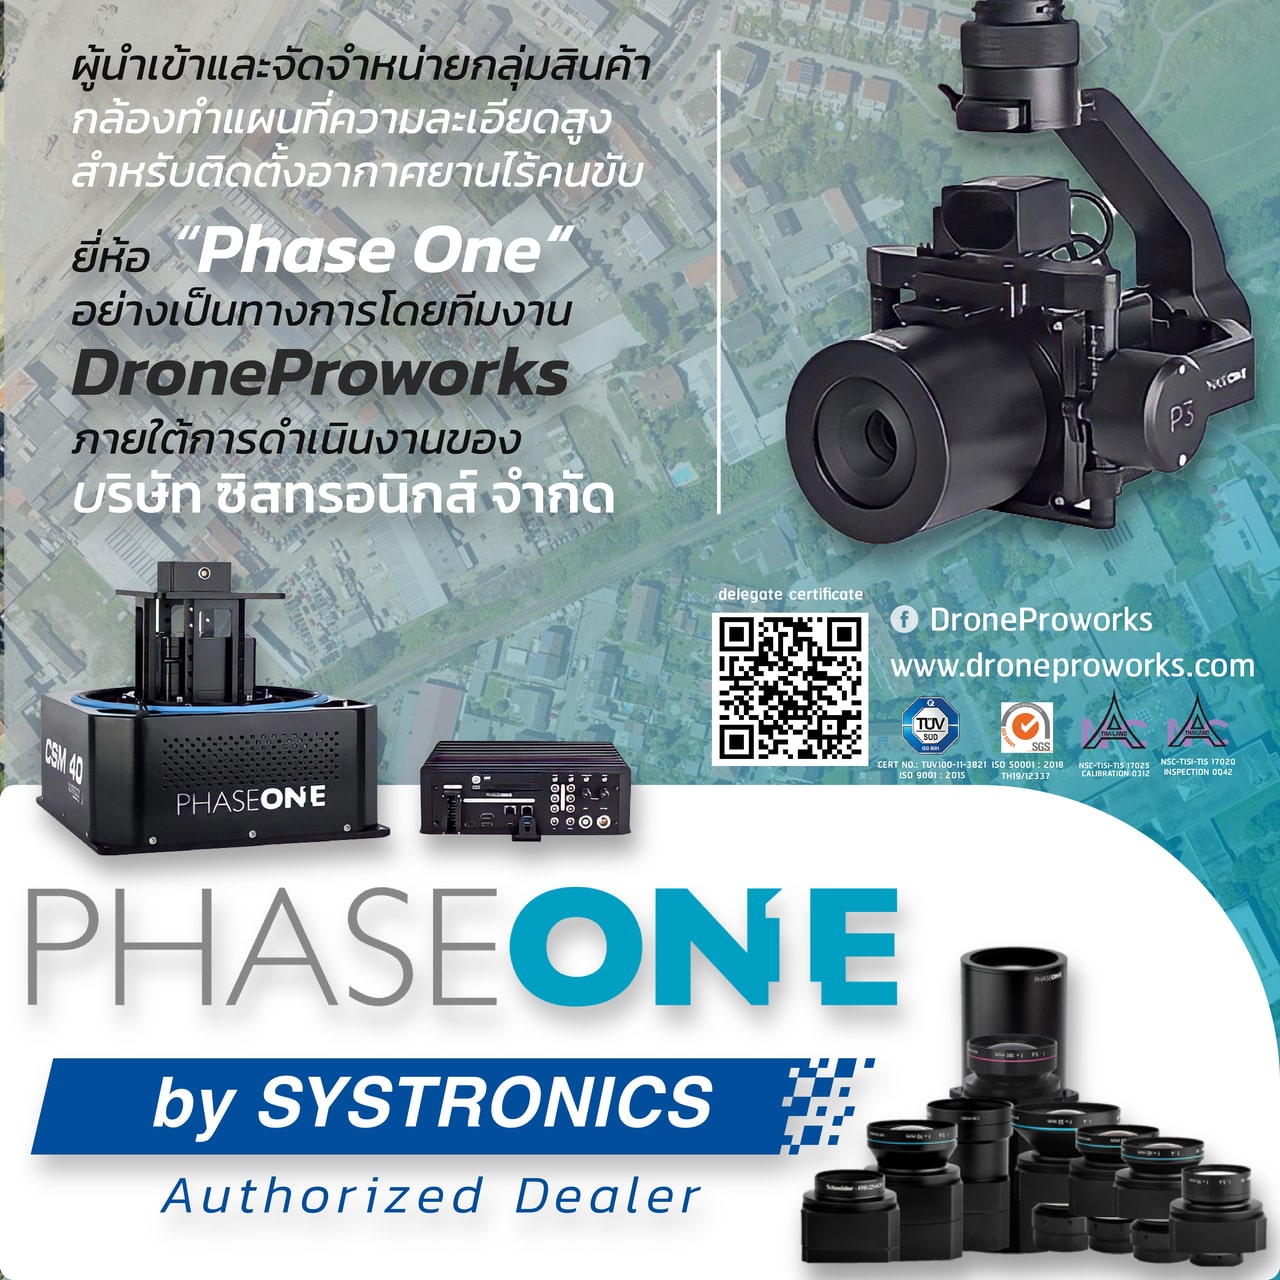 Phase One Authorized Dealer in Thailand